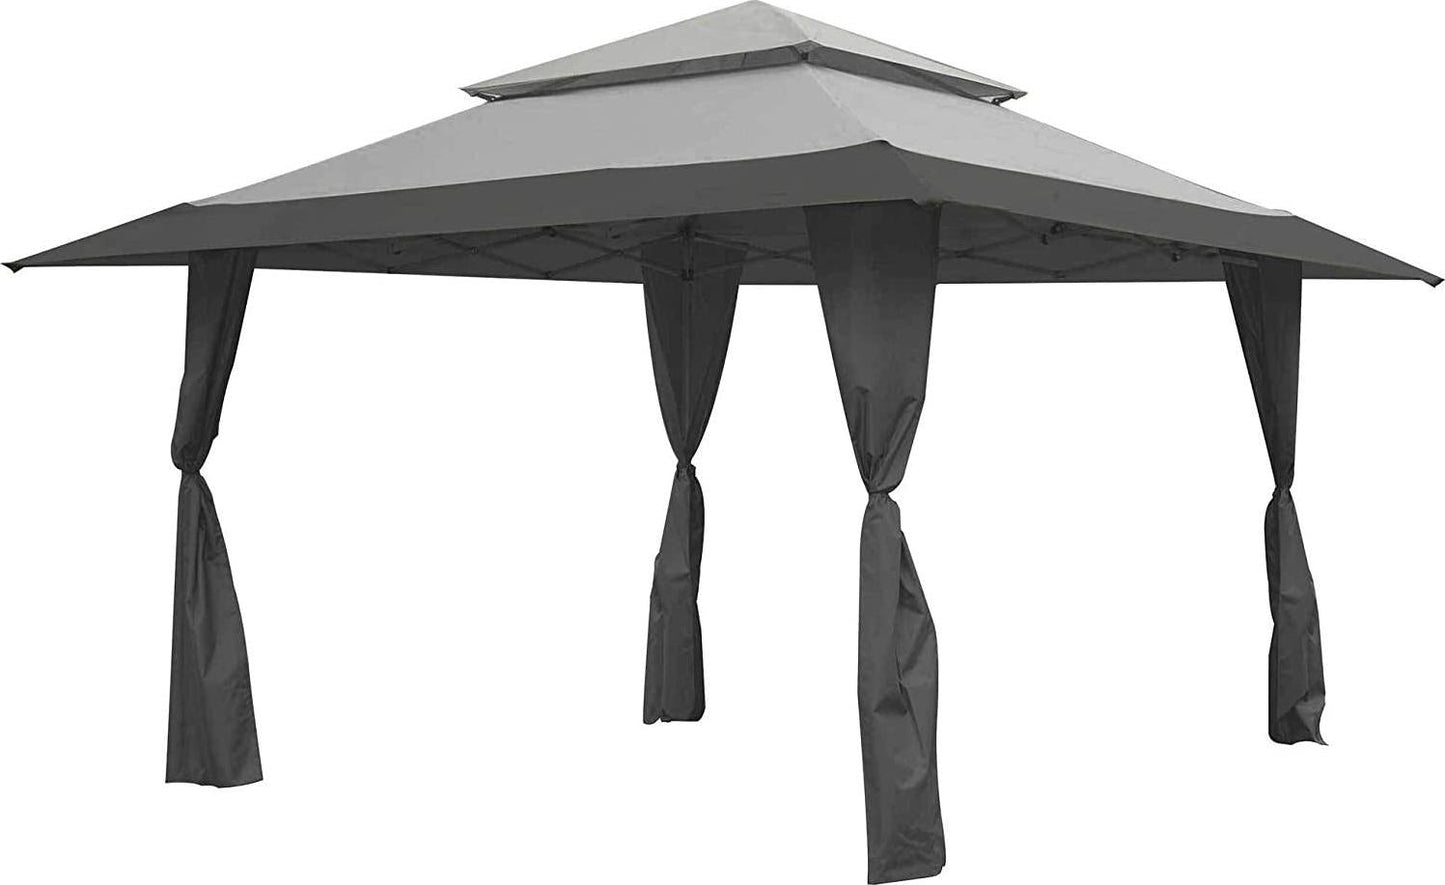 Z-Shade 13 x 13 Foot Instant Gazebo Outdoor Canopy Patio Shelter Tent with Reliable Stakes, Steel Frame, and Rolling Bag, Gray-